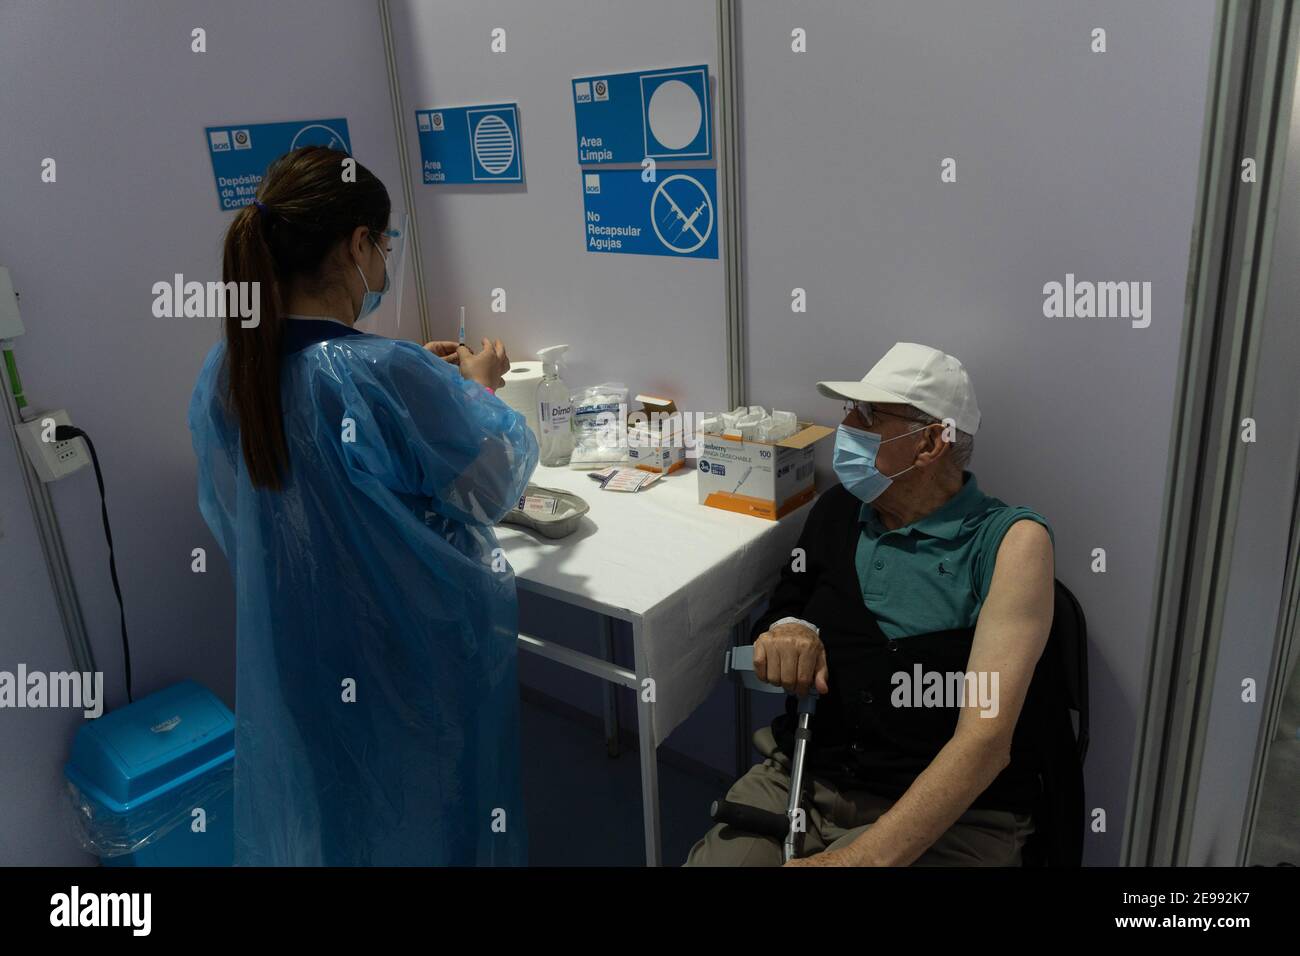 Santiago, Metropolitana, Chile. 3rd Feb, 2021. An older adult is vaccinated with Sinovac, on the first day of mass vaccination against covid in Chile. Credit: Matias Basualdo/ZUMA Wire/Alamy Live News Stock Photo